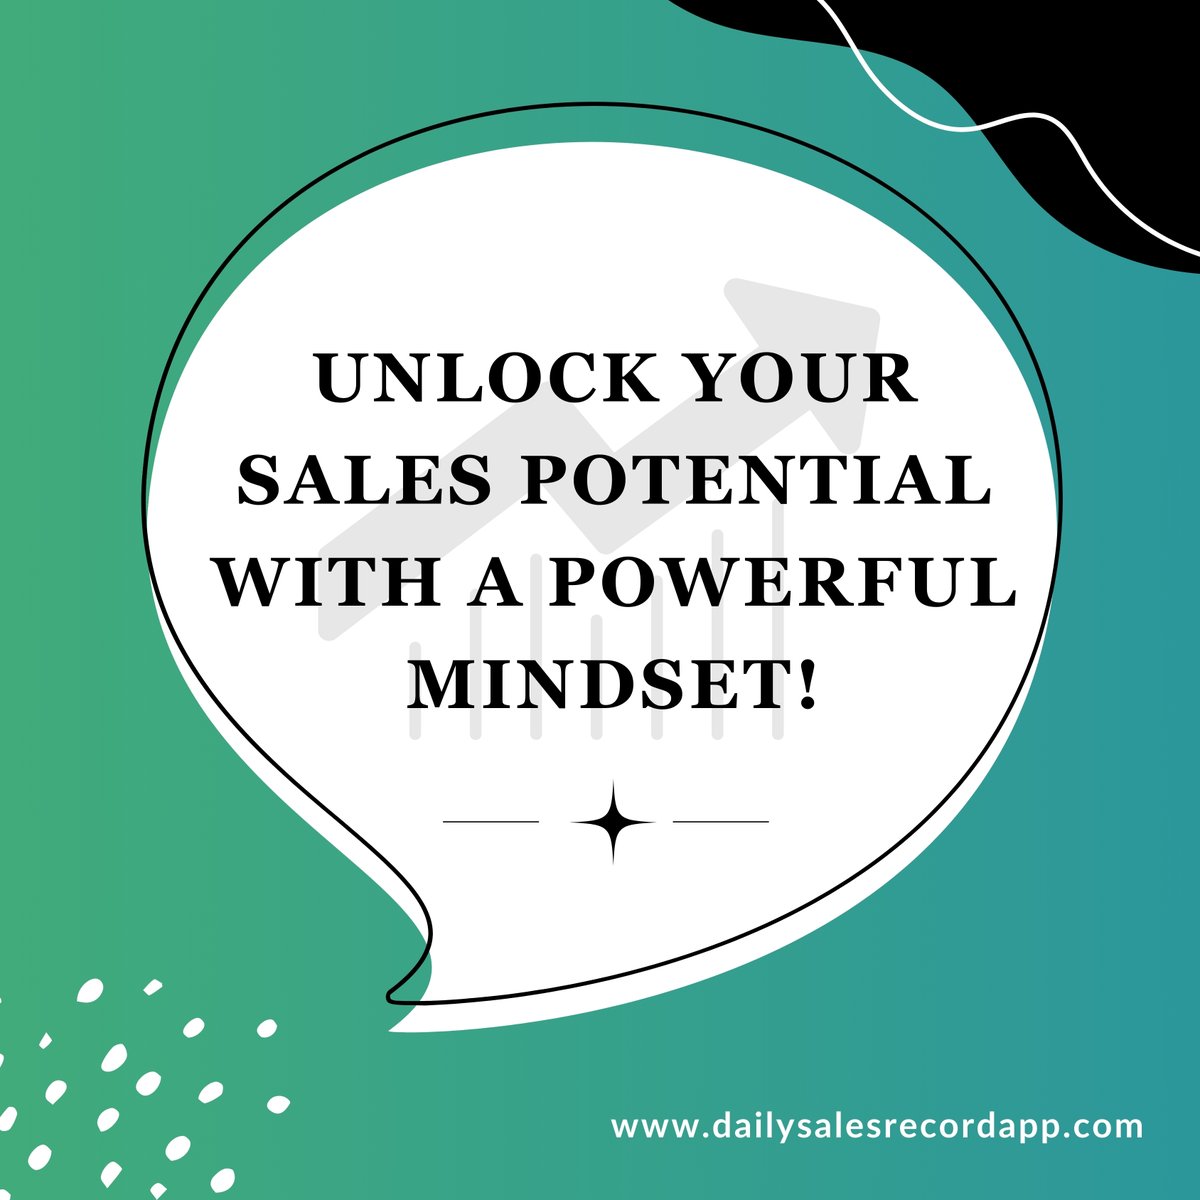 Mastering your mindset is the secret to sales success. Positivity, resilience, and adaptability can elevate your game.

#MindsetMastery
#SalesSuccessSecrets
#PositiveVibesOnly
#ResilientSales
#AdaptAndSucceed
#MindsetIsKey
#ElevateYourGame
#SuccessMindset
#PositivityWins